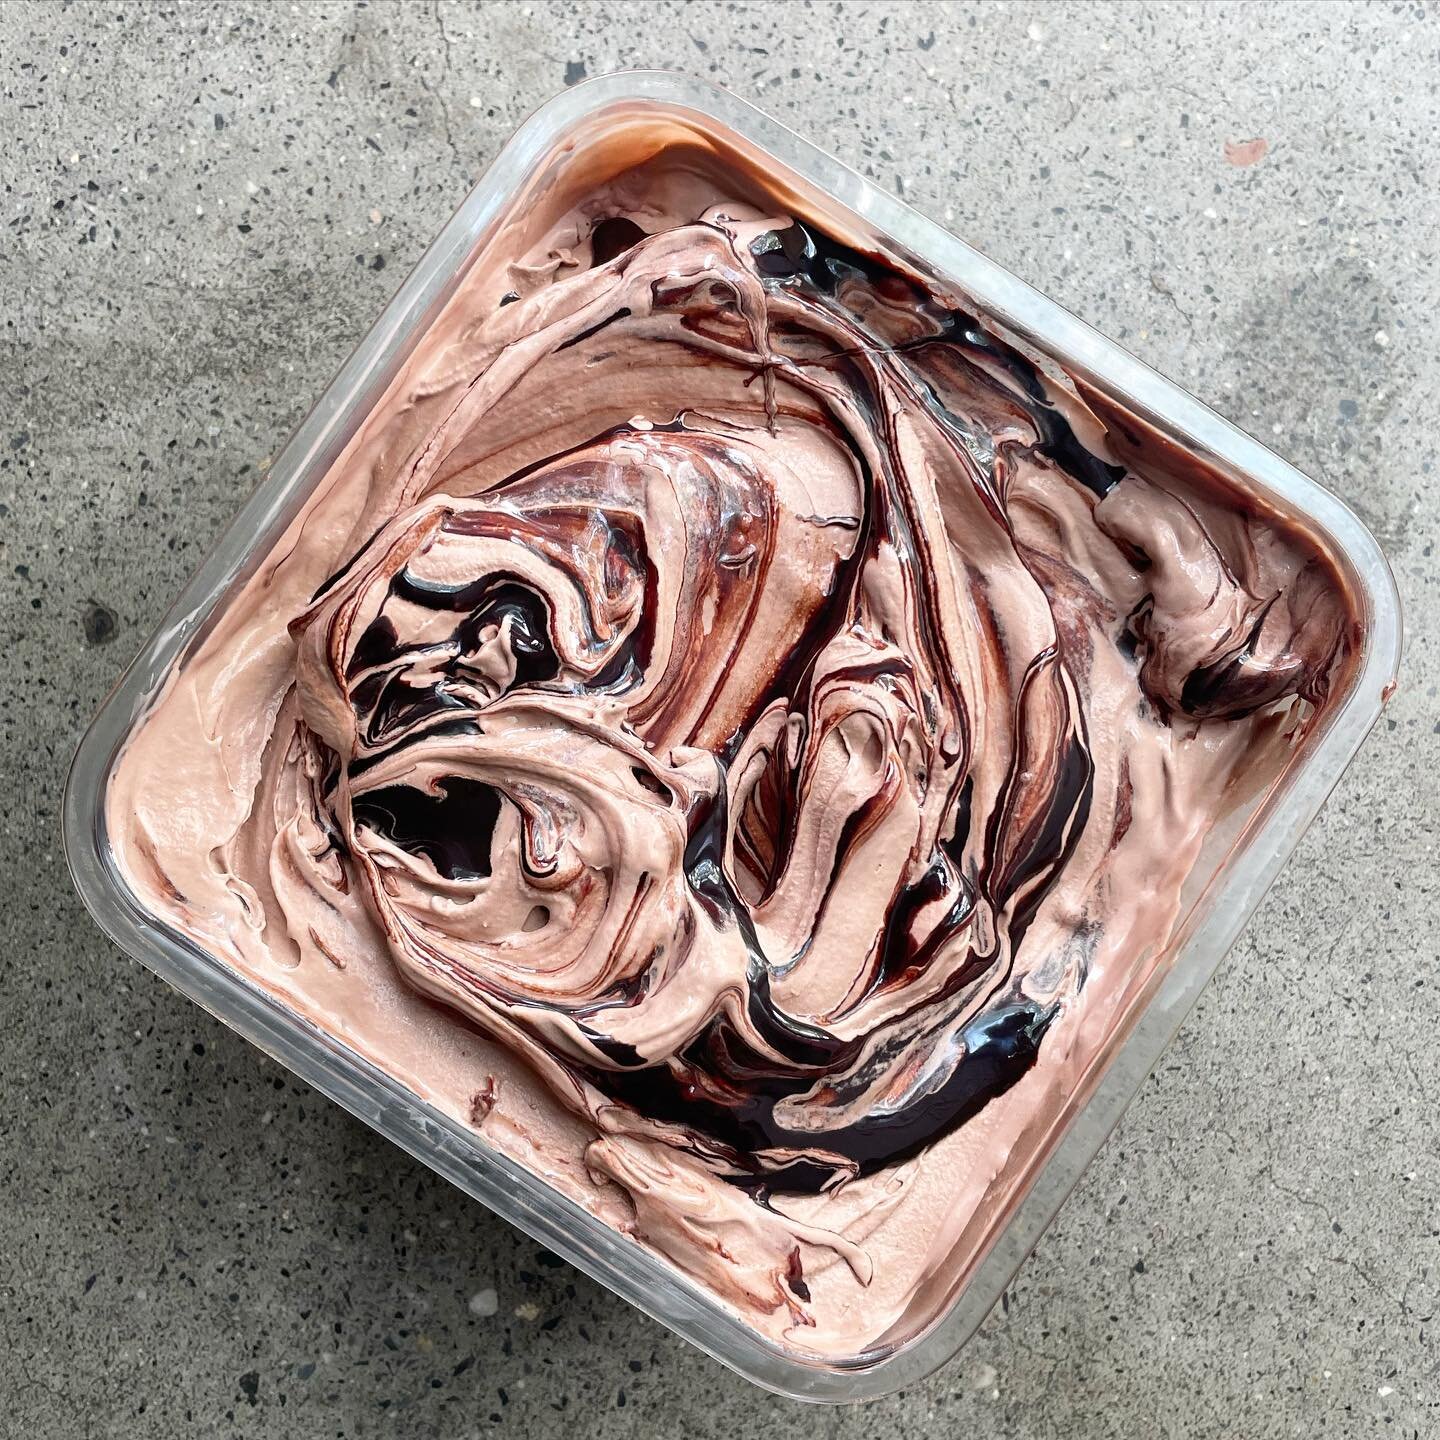 You don&rsquo;t want to miss this Double Chocolate drop
Chocolate ice cream with swirls of housemade chocolate sauce. Exclusively available this week @caletanyc